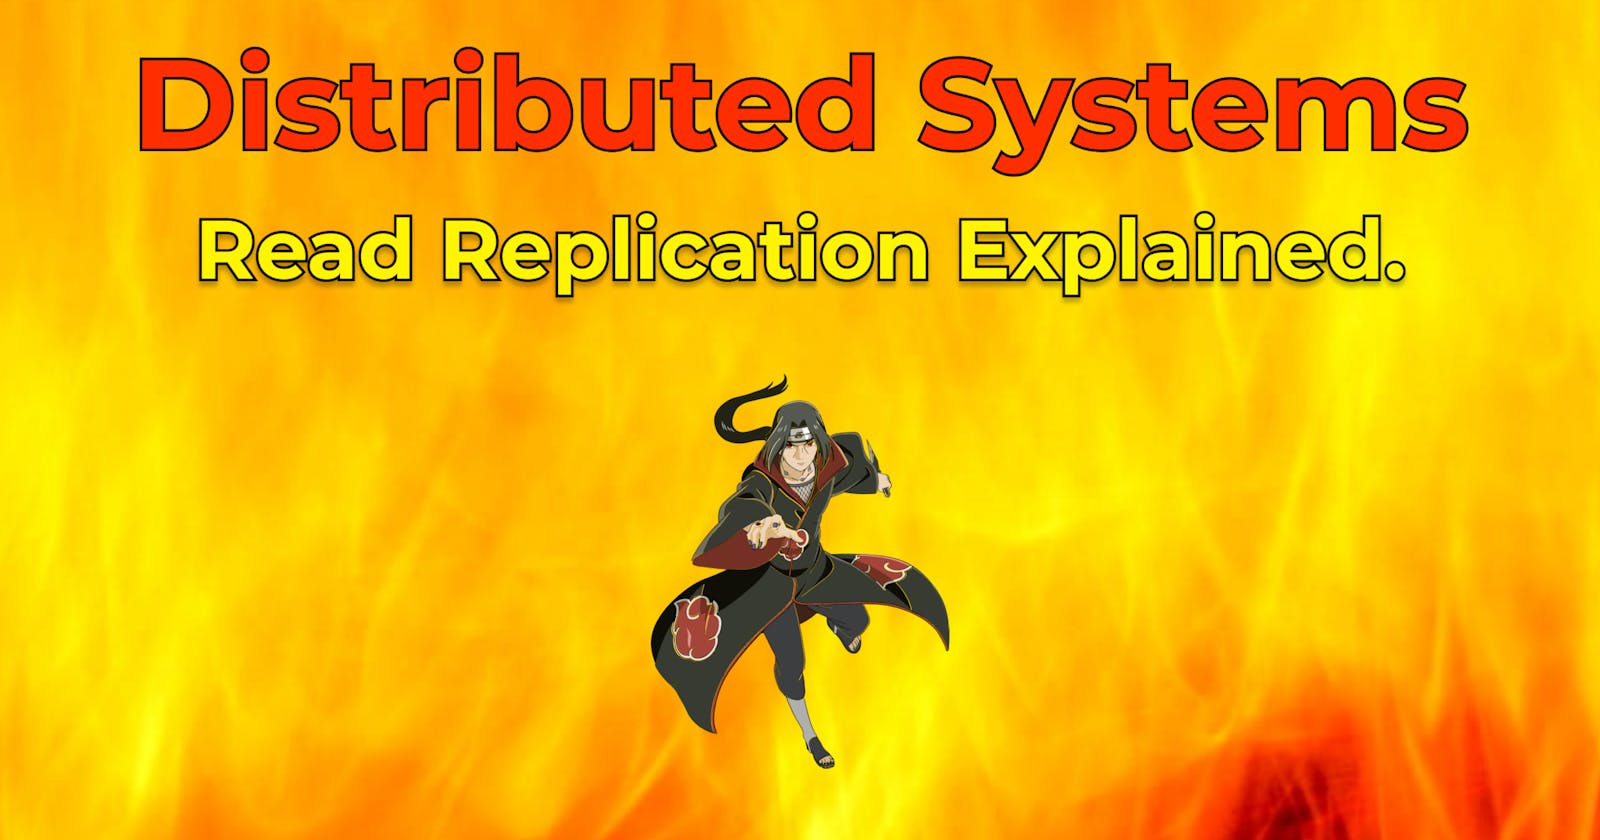 Distributed systems: Read Replication